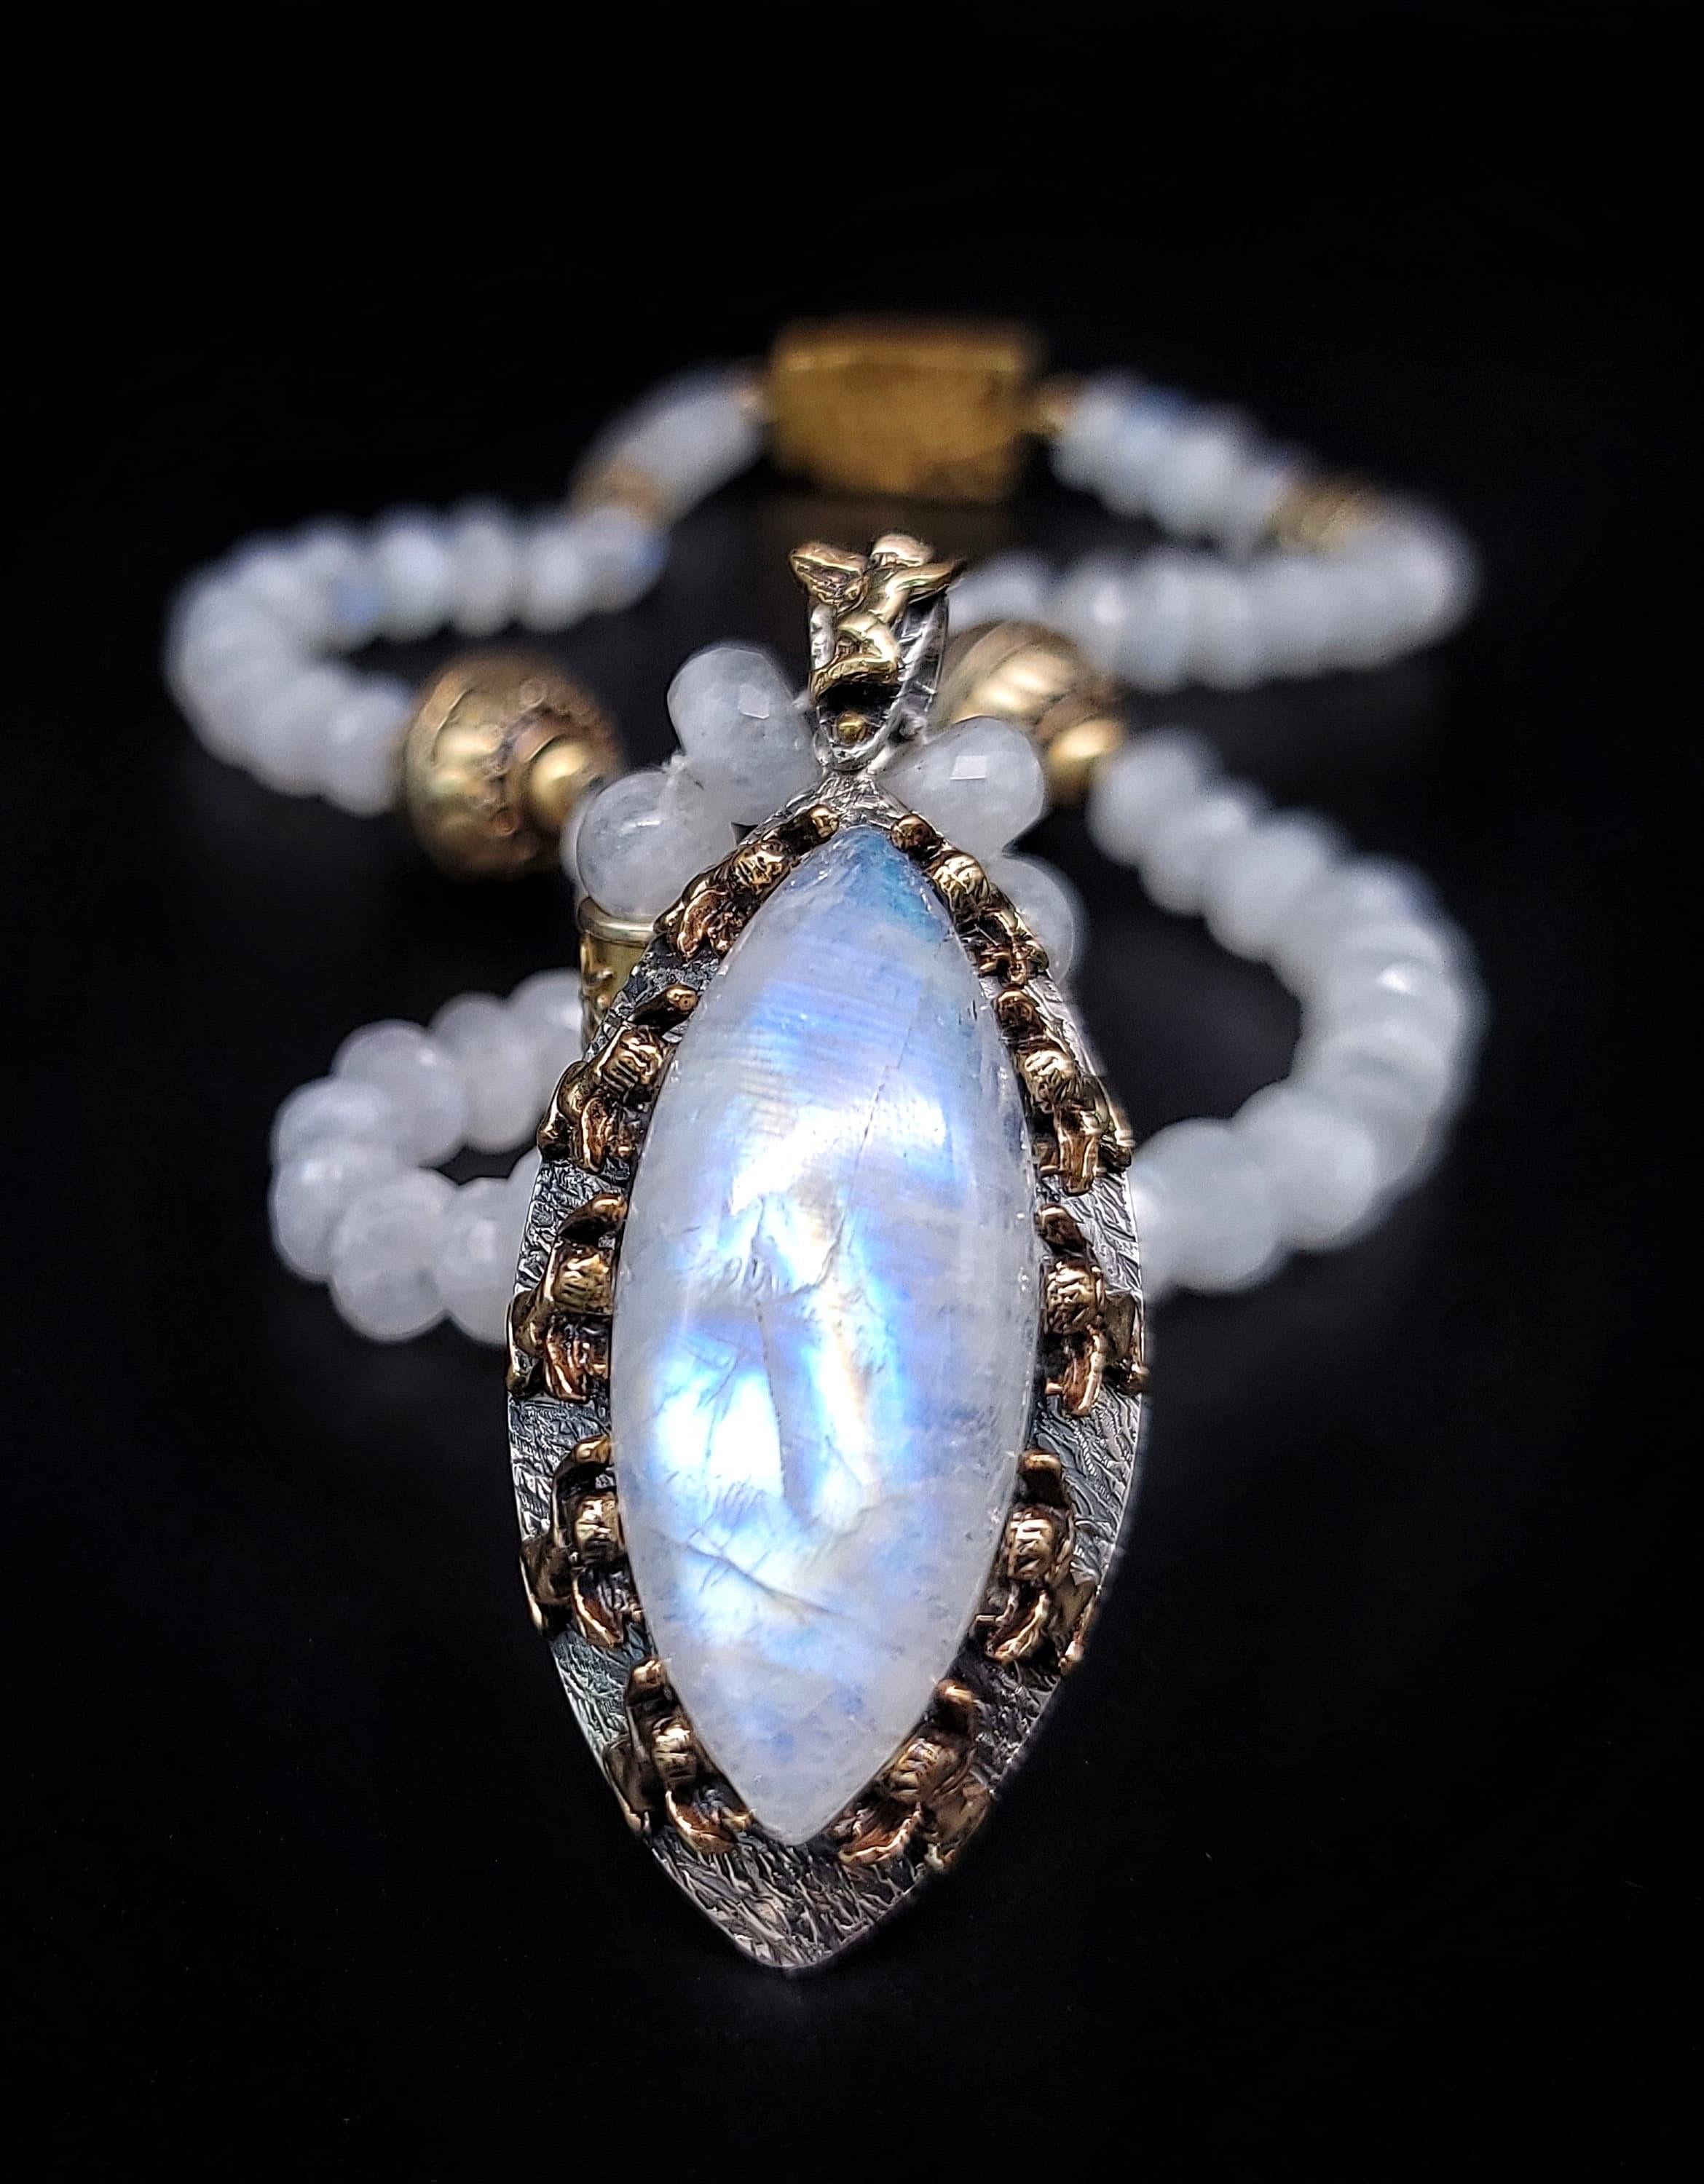 Mixed Cut A.Jeschel Rainbow Moonstone necklace set in a beautiful hand-crafted pendant.